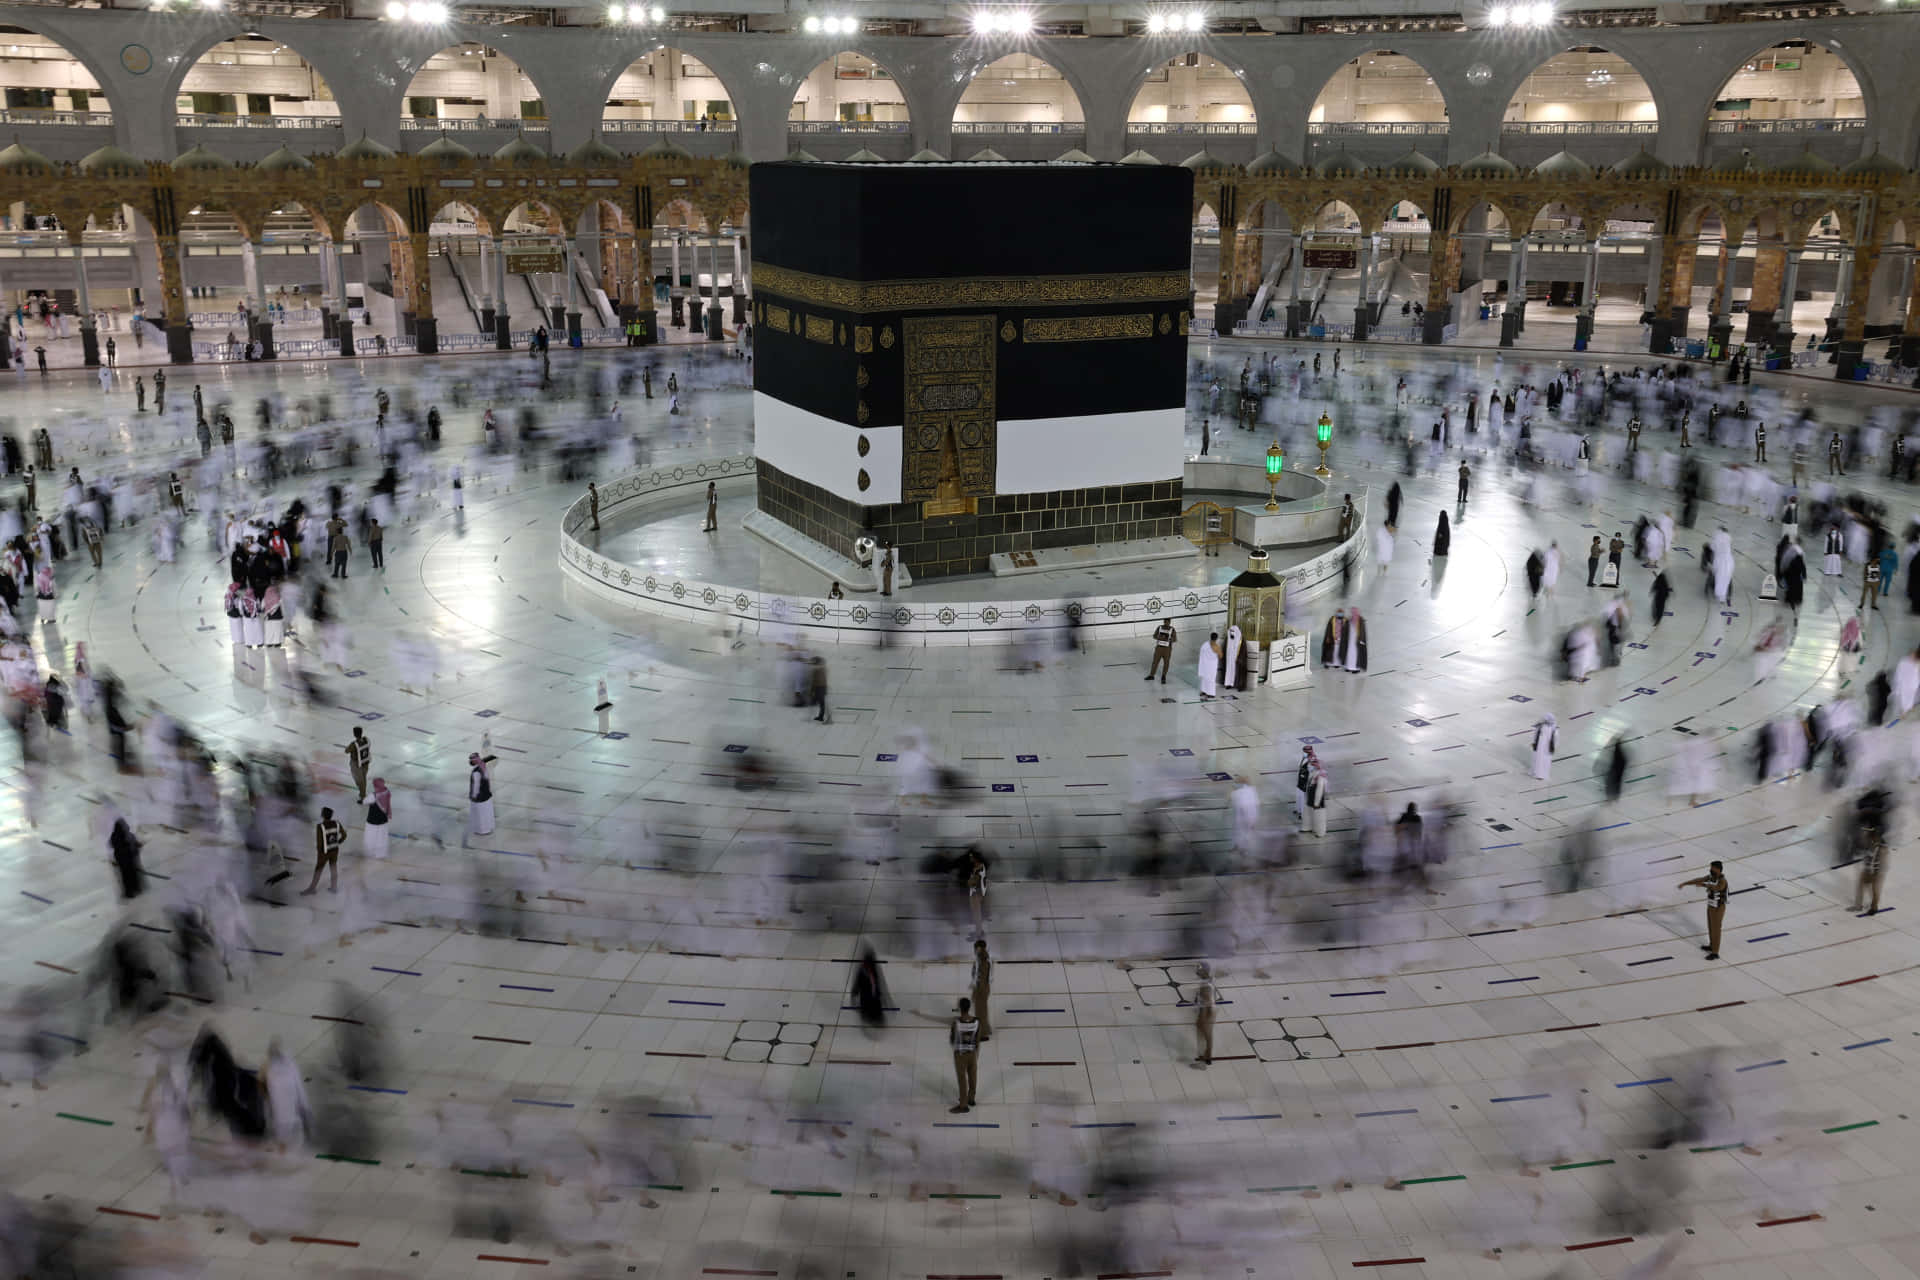 A Mosque With People Walking Around The Kaaba